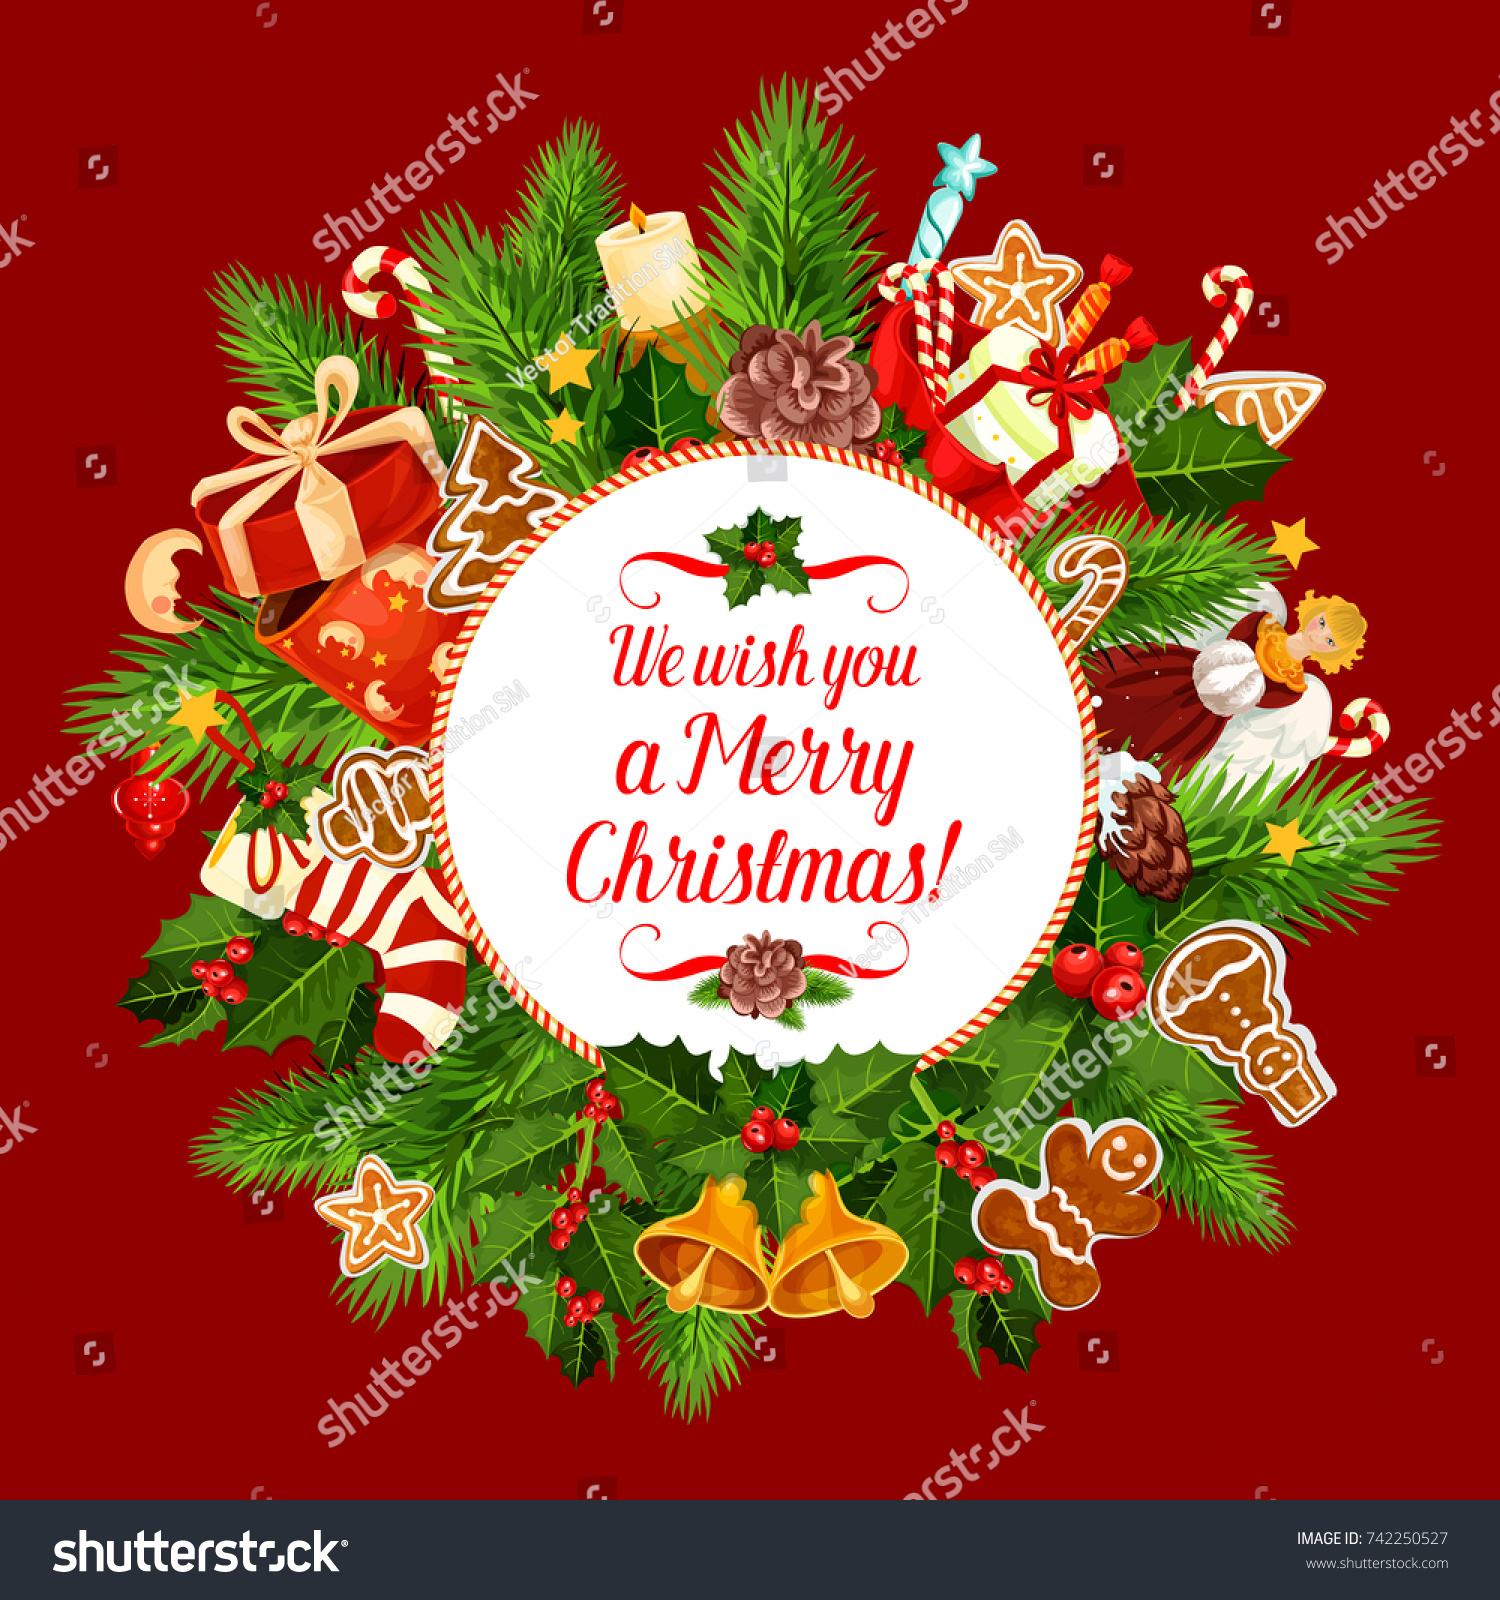 Merry Christmas Greeting Card Design Happy Stock Vector 742250527 - Shutterstock